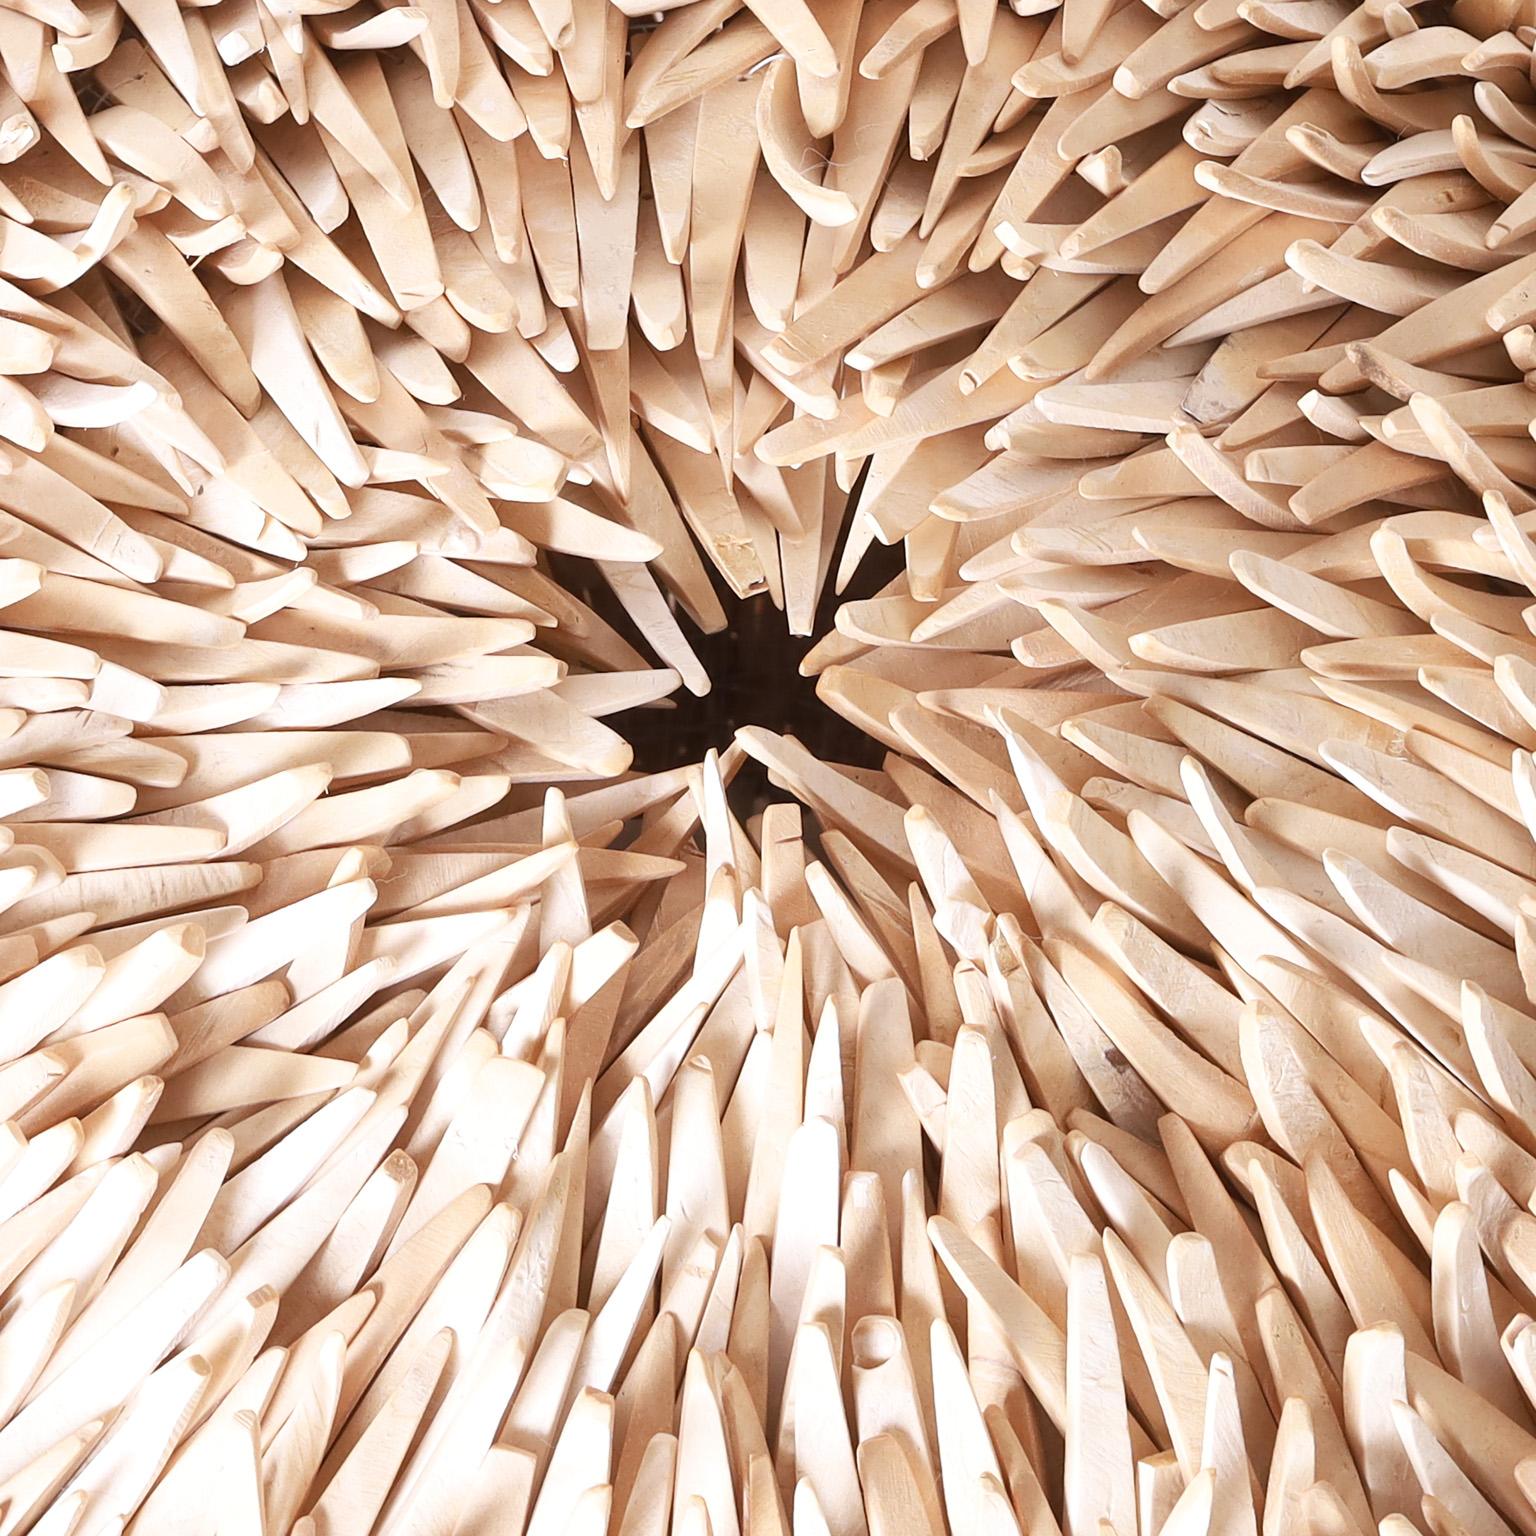 Striking sea urchin form lighted sculpture ambitiously crafted with hundreds of wood spines fixed to a sturdy metal frame.